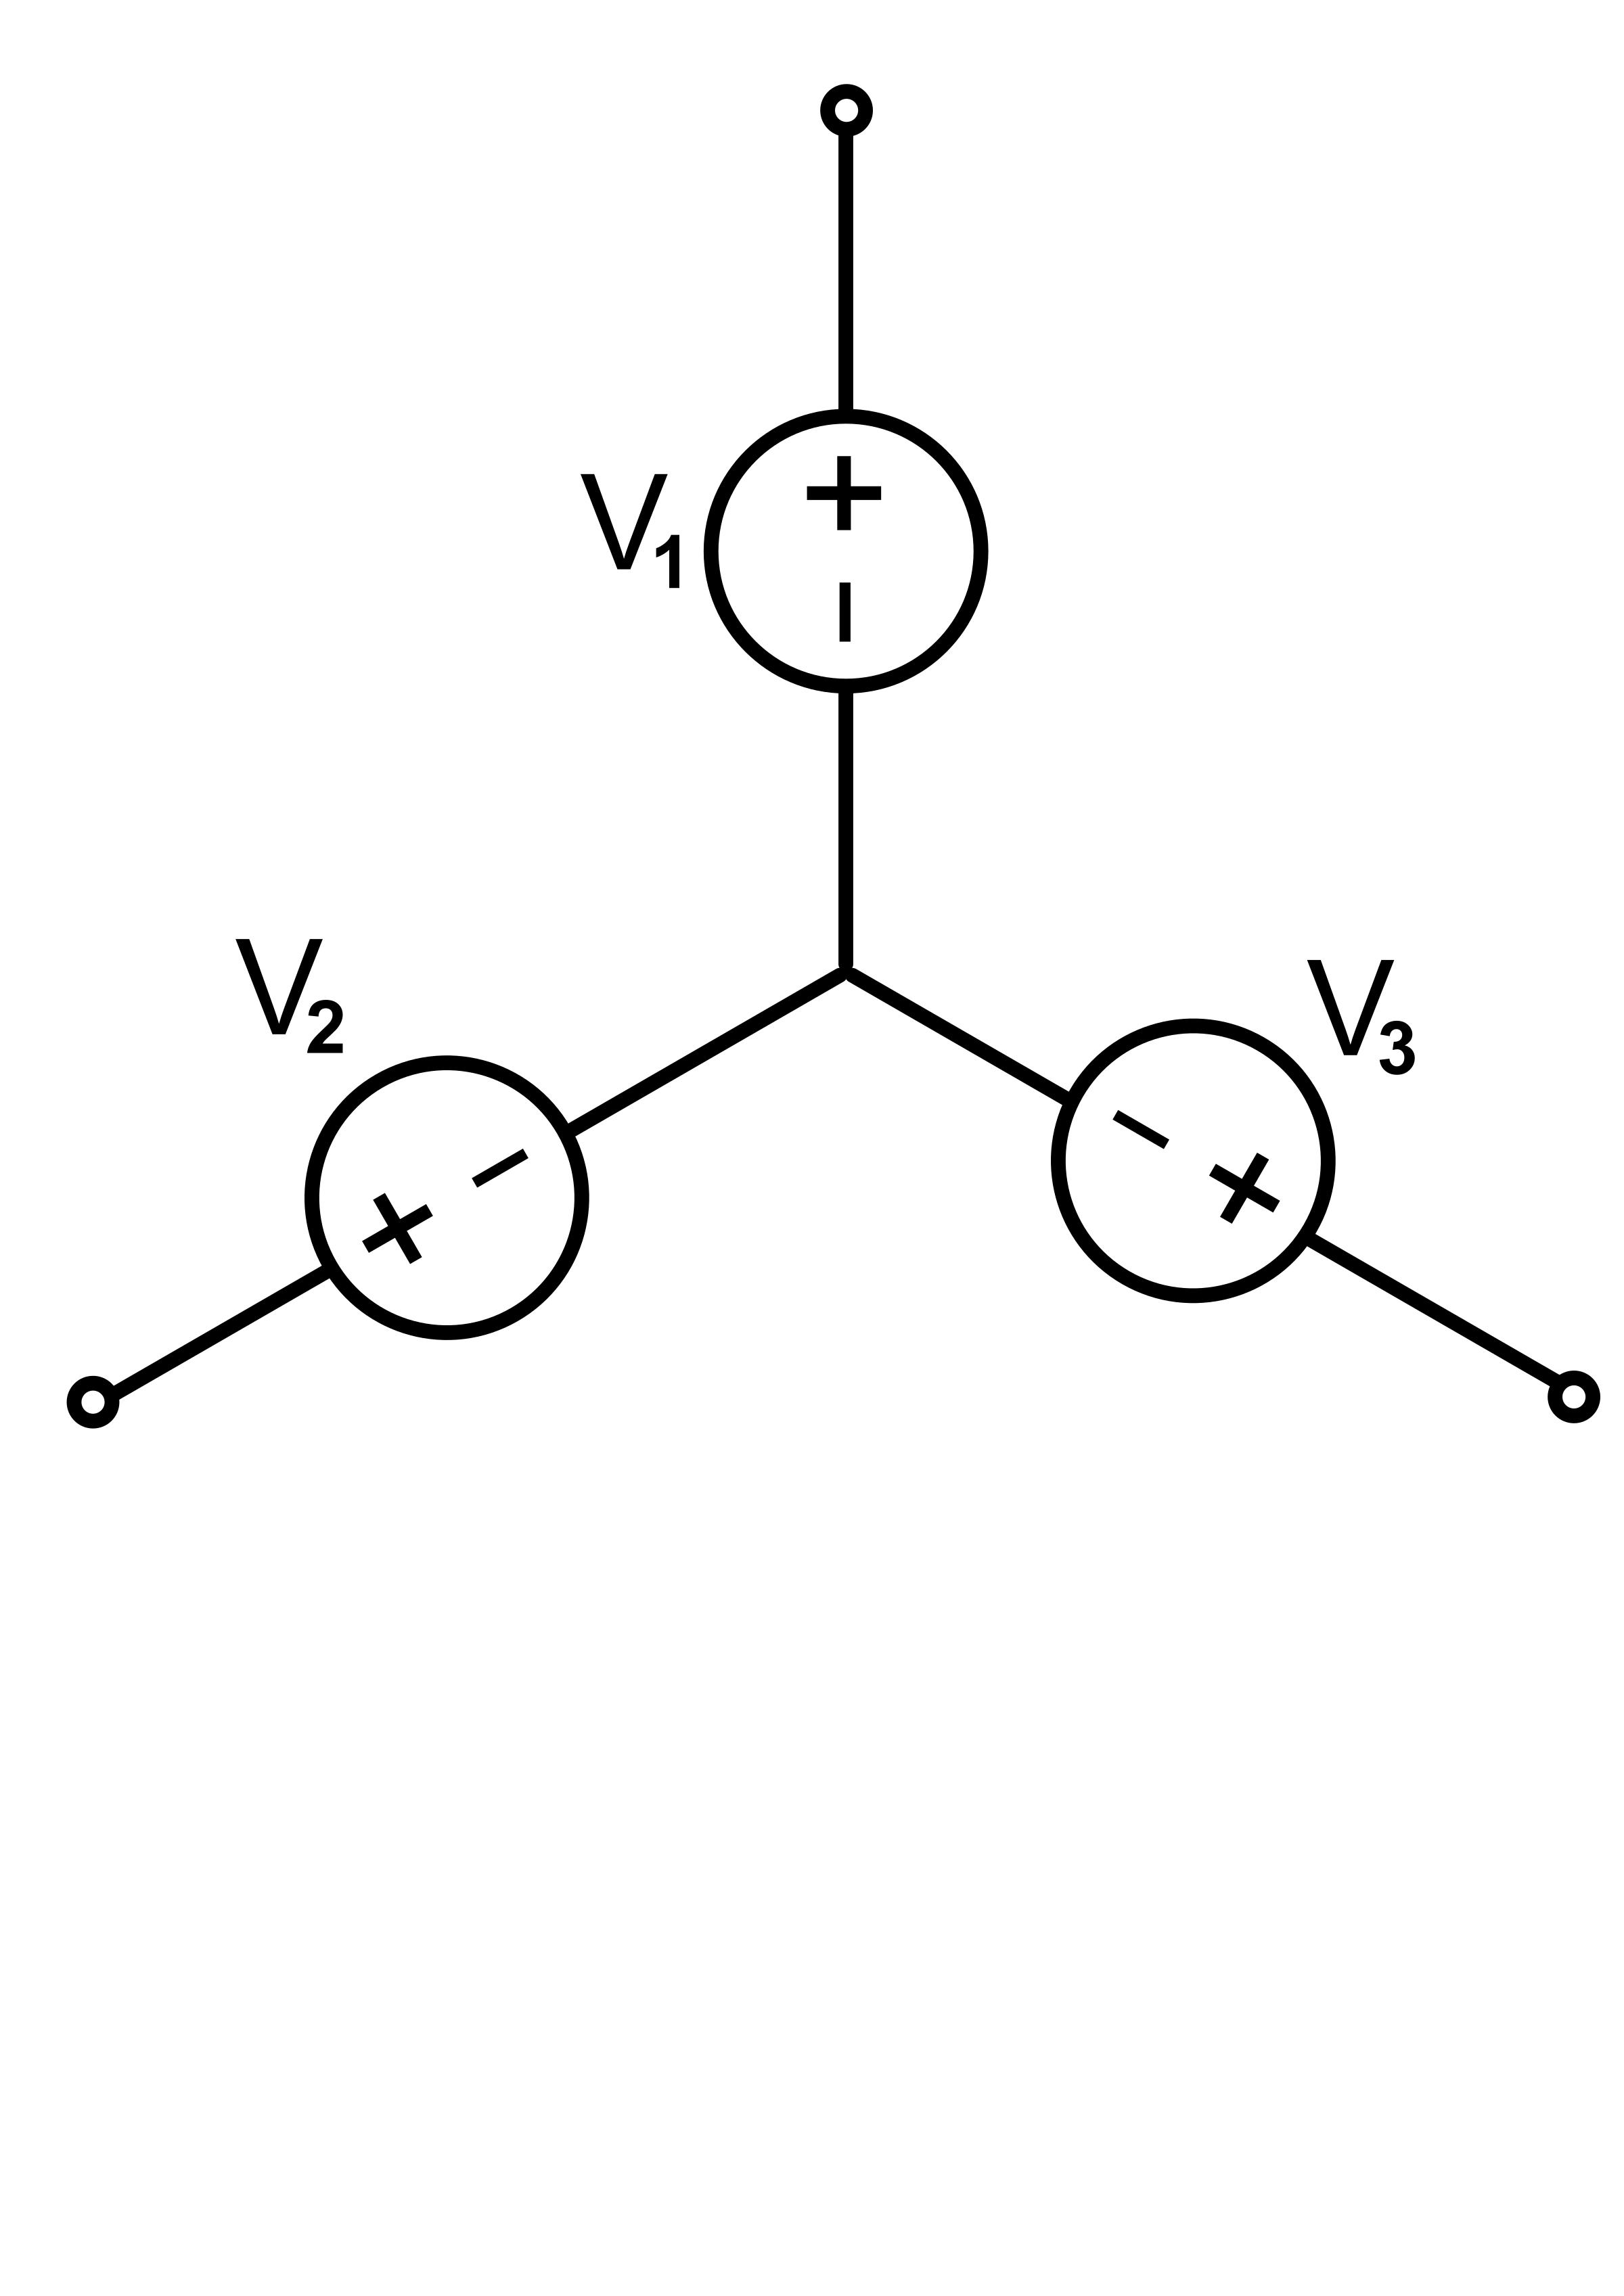 A Three-phase electric power png